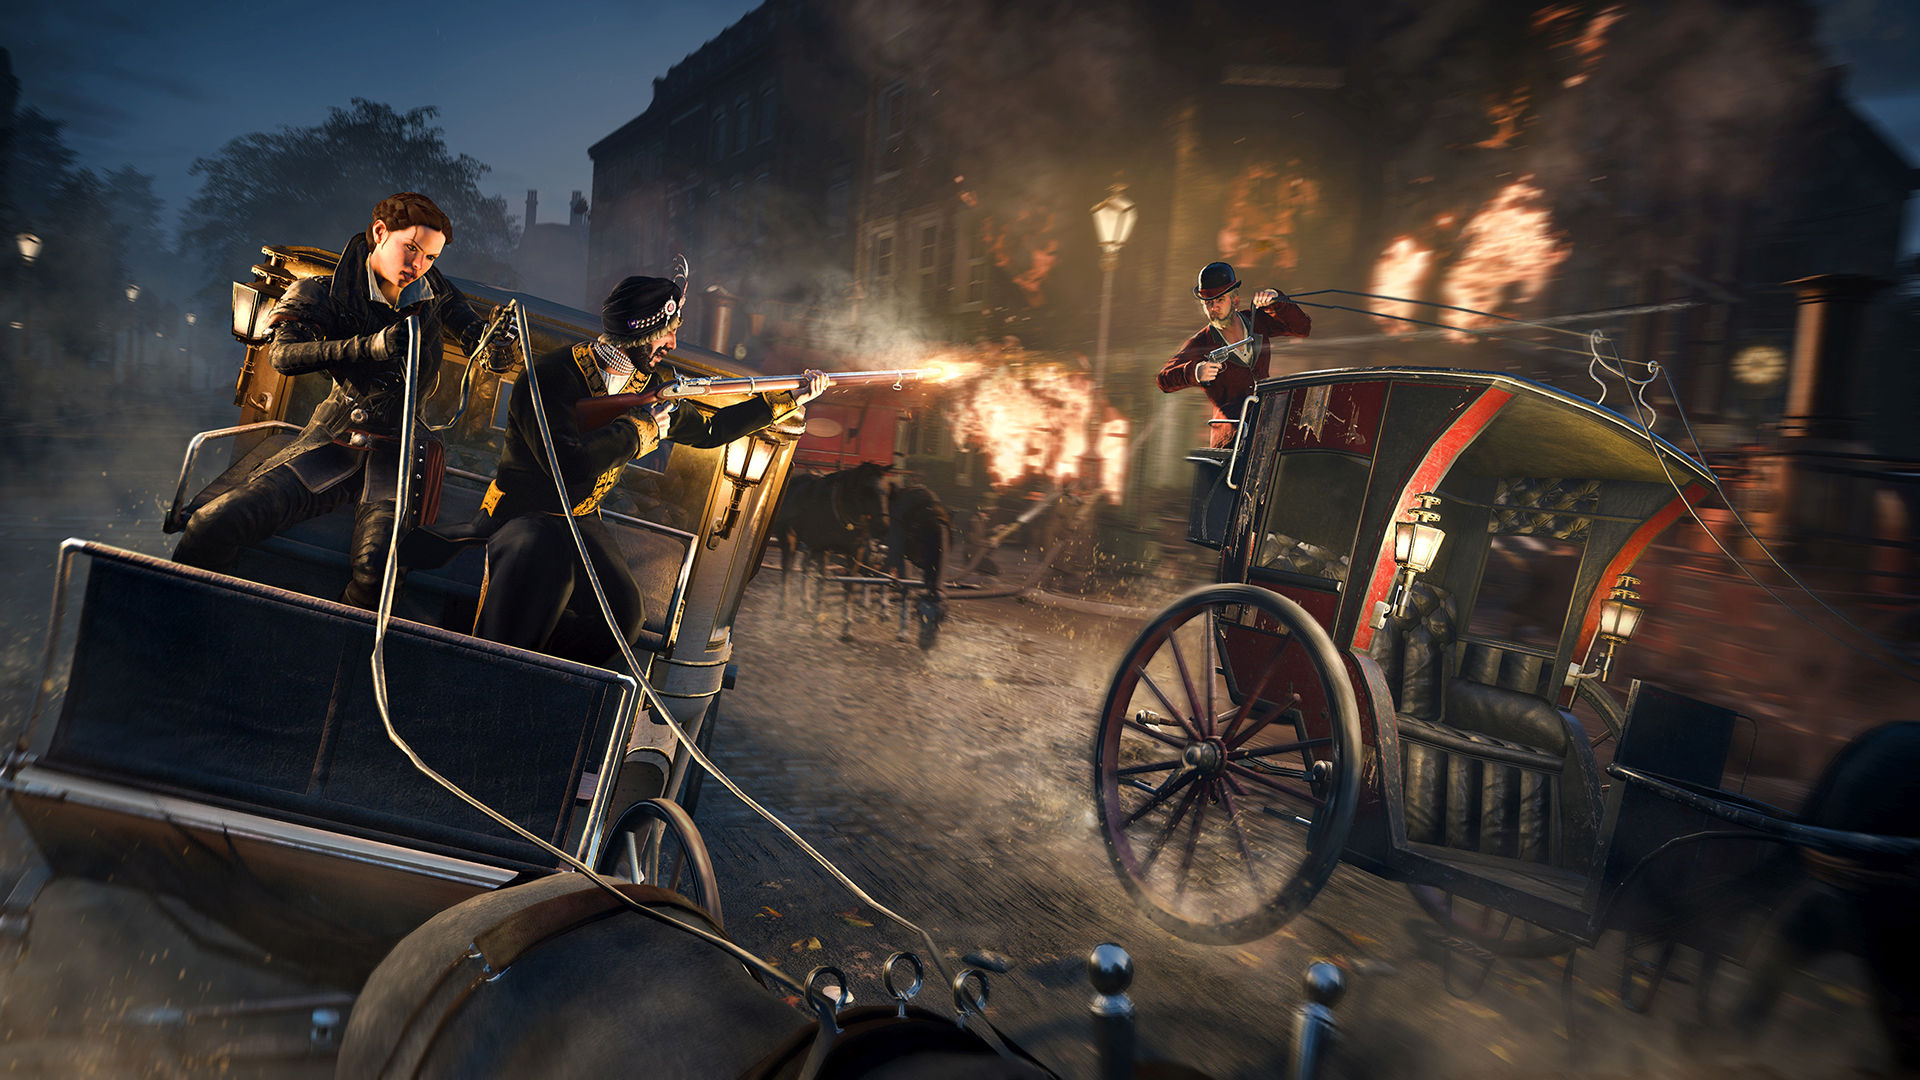 Скриншот *Assassin's Creed: Syndicate [PS4] 5.05 / 6.72 / 7.02 [EUR] (2015) [Русский] (v1.52)*